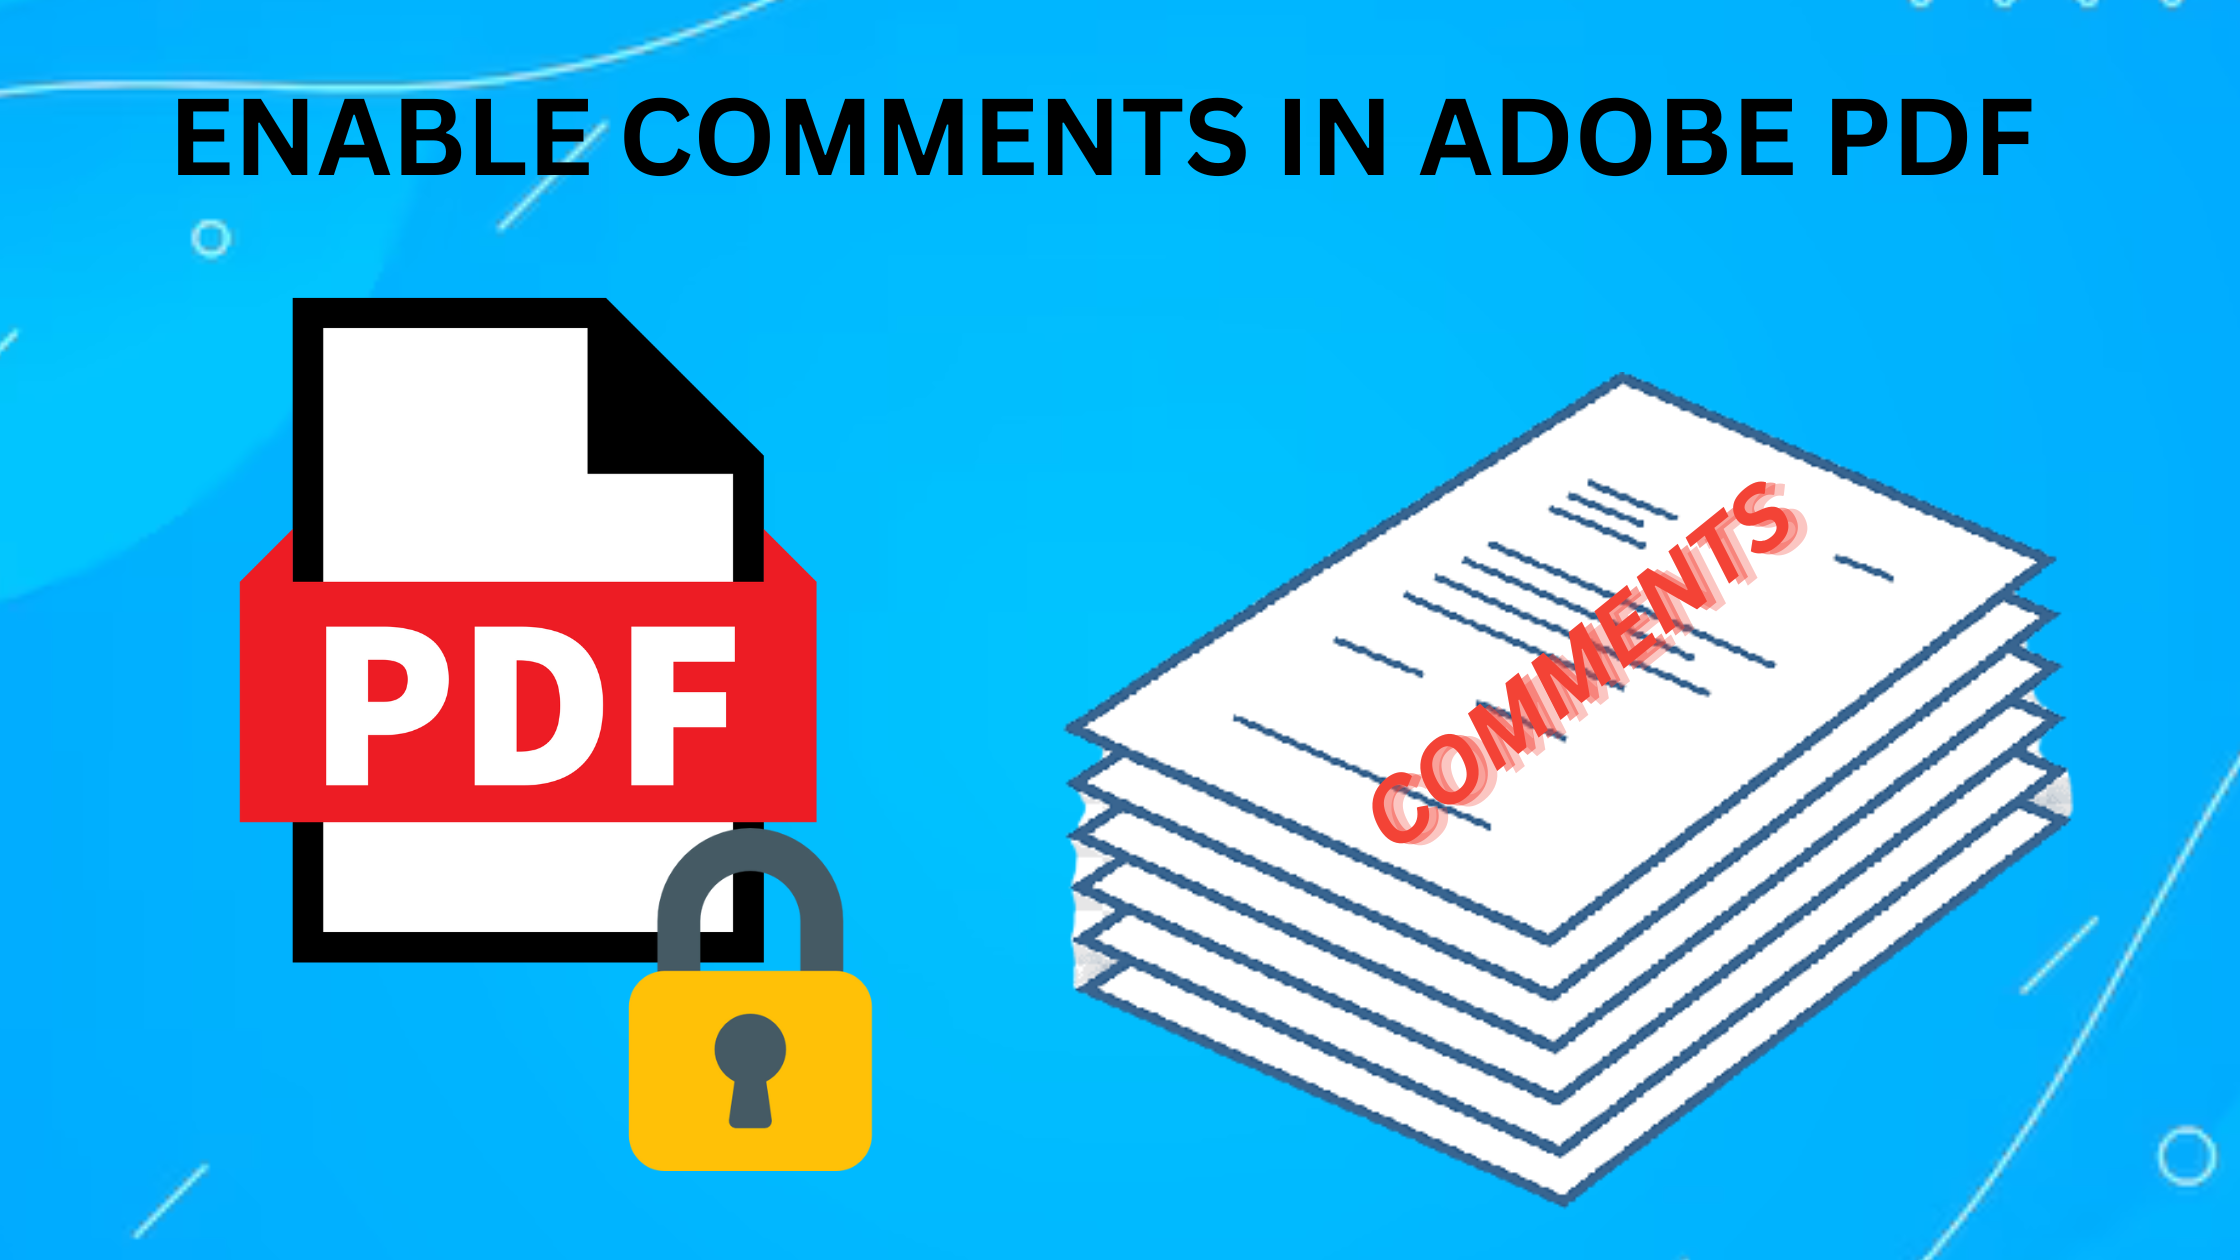 ENABLE COMMENTS IN ADOBE PDF